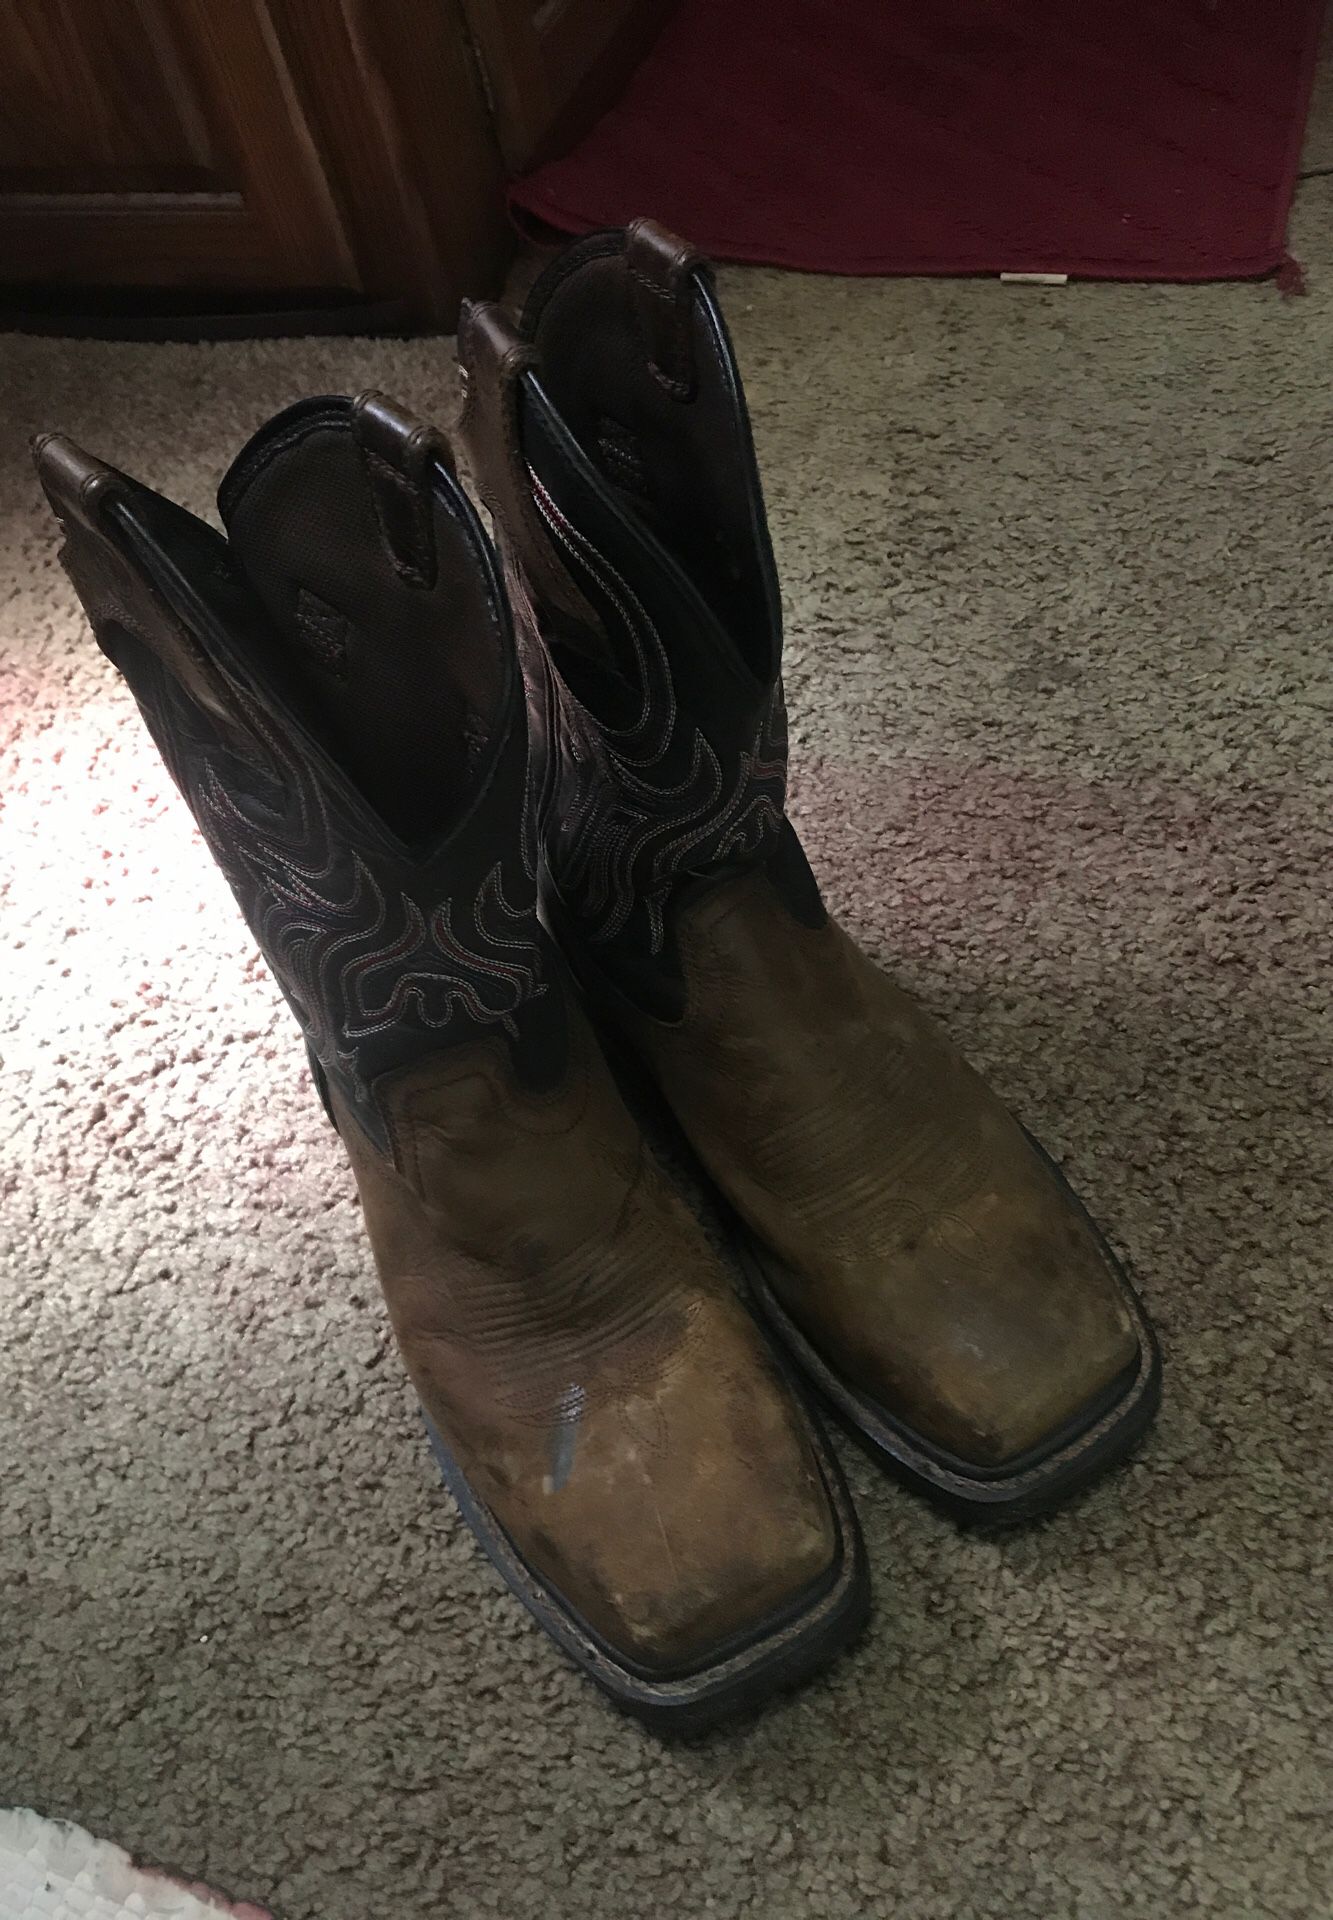 Justin work boots .. worn only a few times .